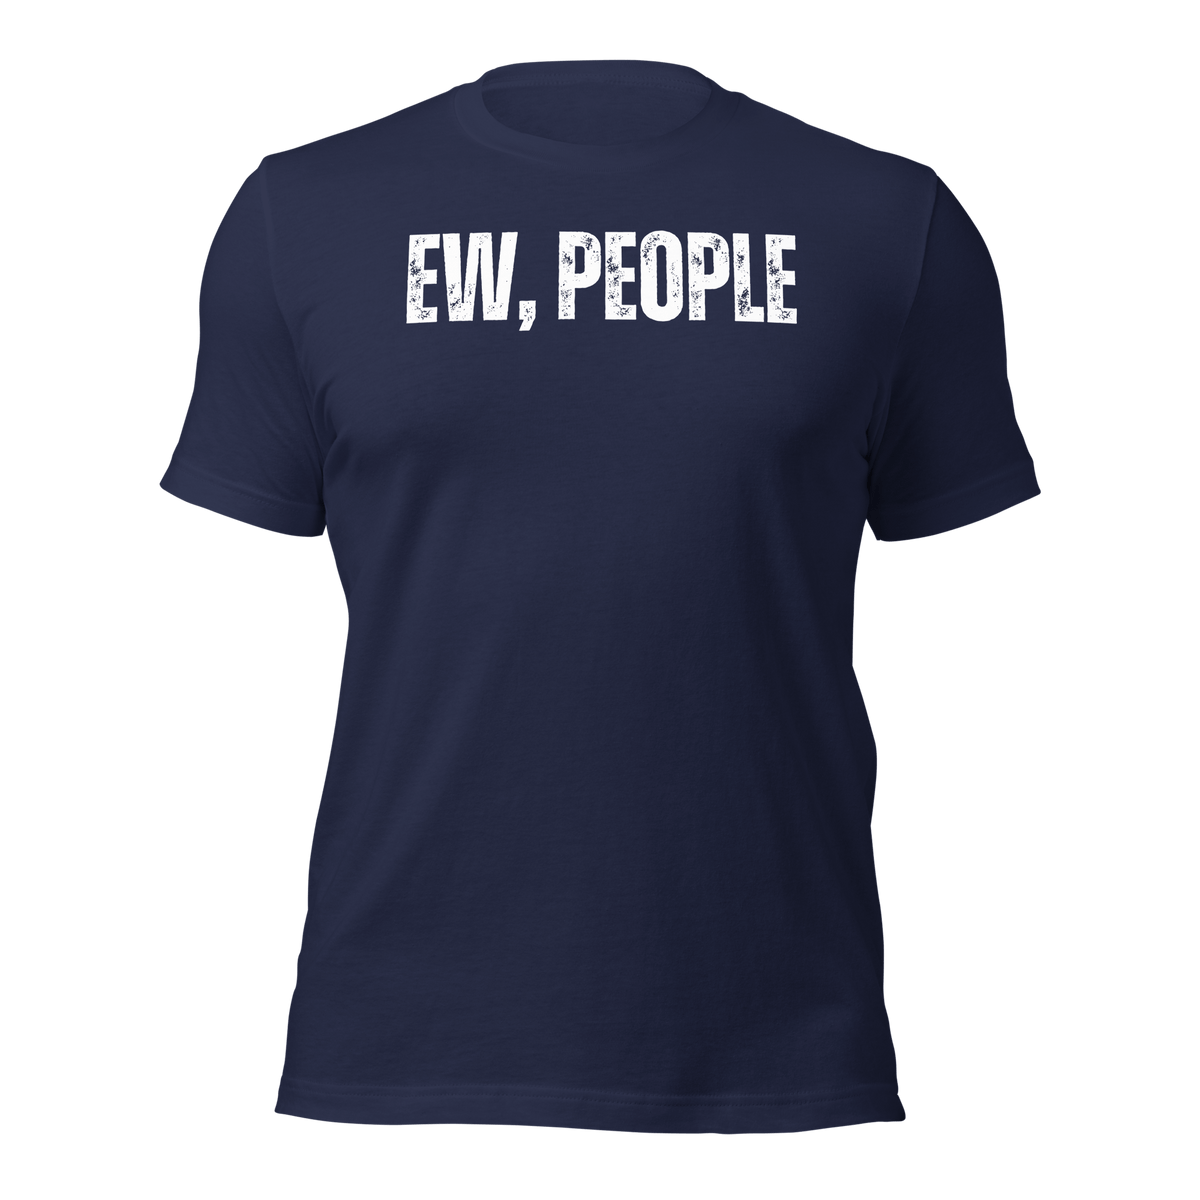 Navy- Funny Tees, Introvert Apparel, Humor Clothing, Statement Shirts, Quirky Fashion, Sassy Style, Casual Wear, Playful Prints, Personality Tops, Witty Outfits, Weekend Vibes, Relaxed Fit, Introvert Pride, Socially Awkward, Lighthearted Attire, Comfortable Chic, Conversational Tee, Solitude Fashion, Unique Statements, Anti-Social Wear, ew people, ew people tshirt, ew people tee